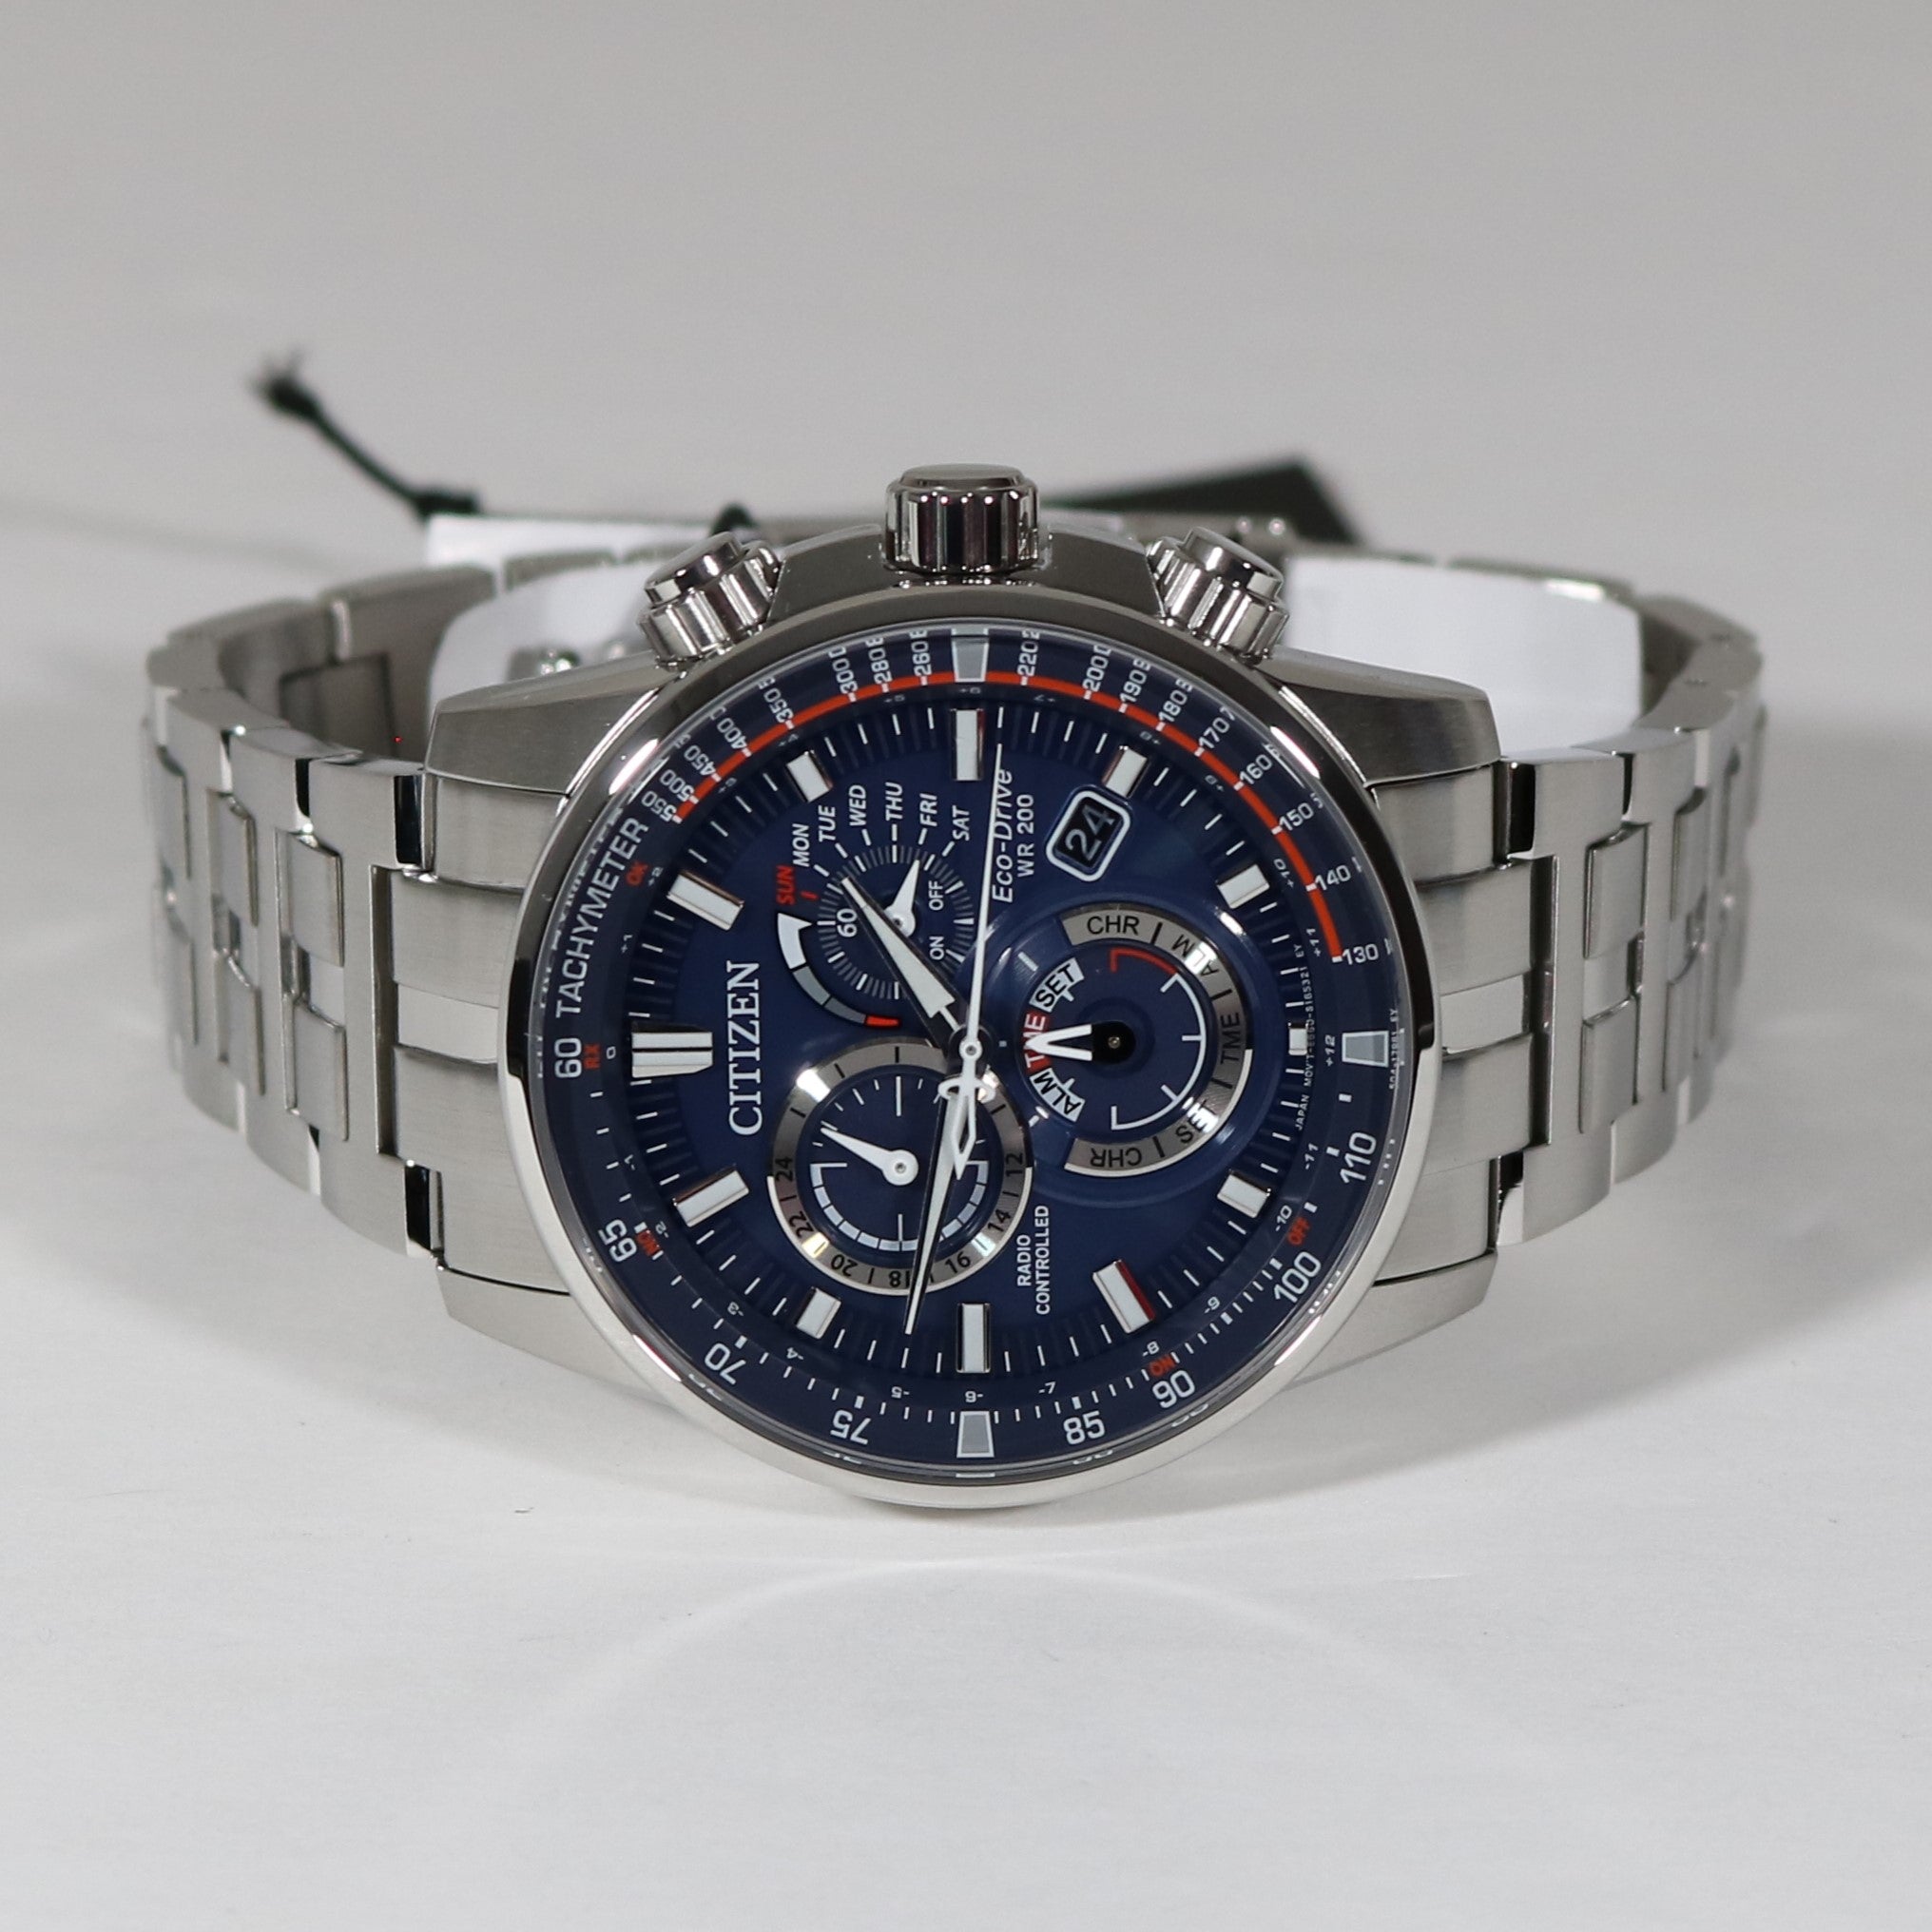 Citizen Eco-Drive PCAT Controlled Chronograph – CB5880-5 Chronobuy Watch Blue Dial